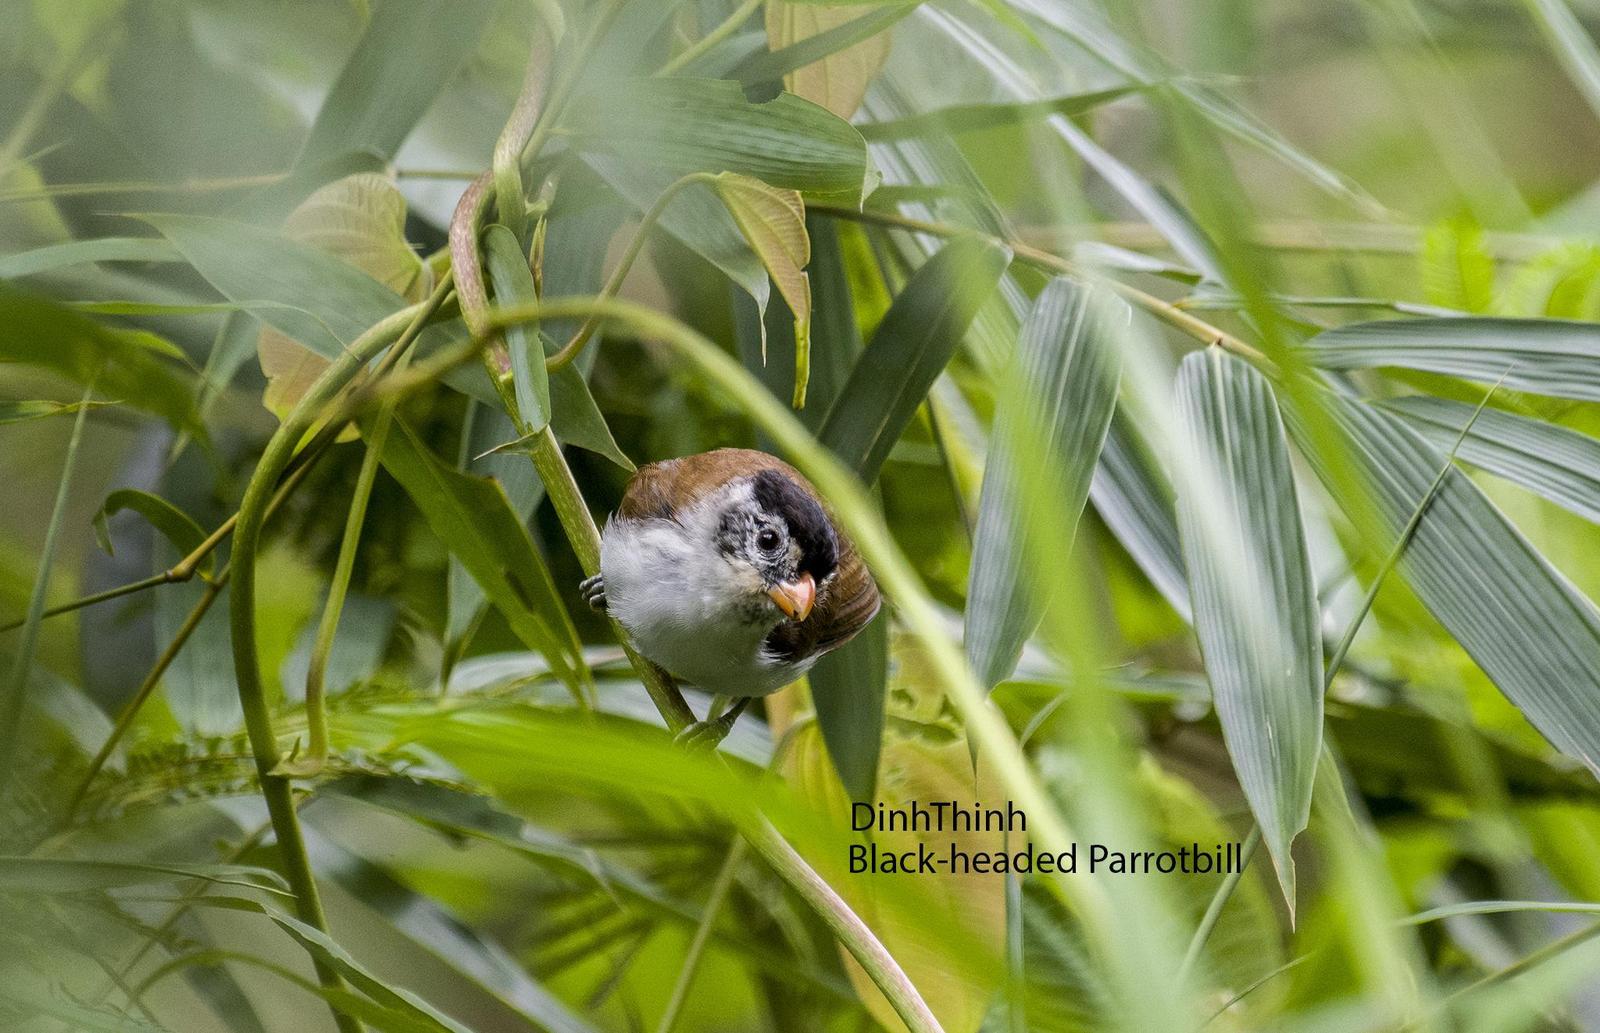 Black-headed Parrotbill Photo by Dinh Thinh